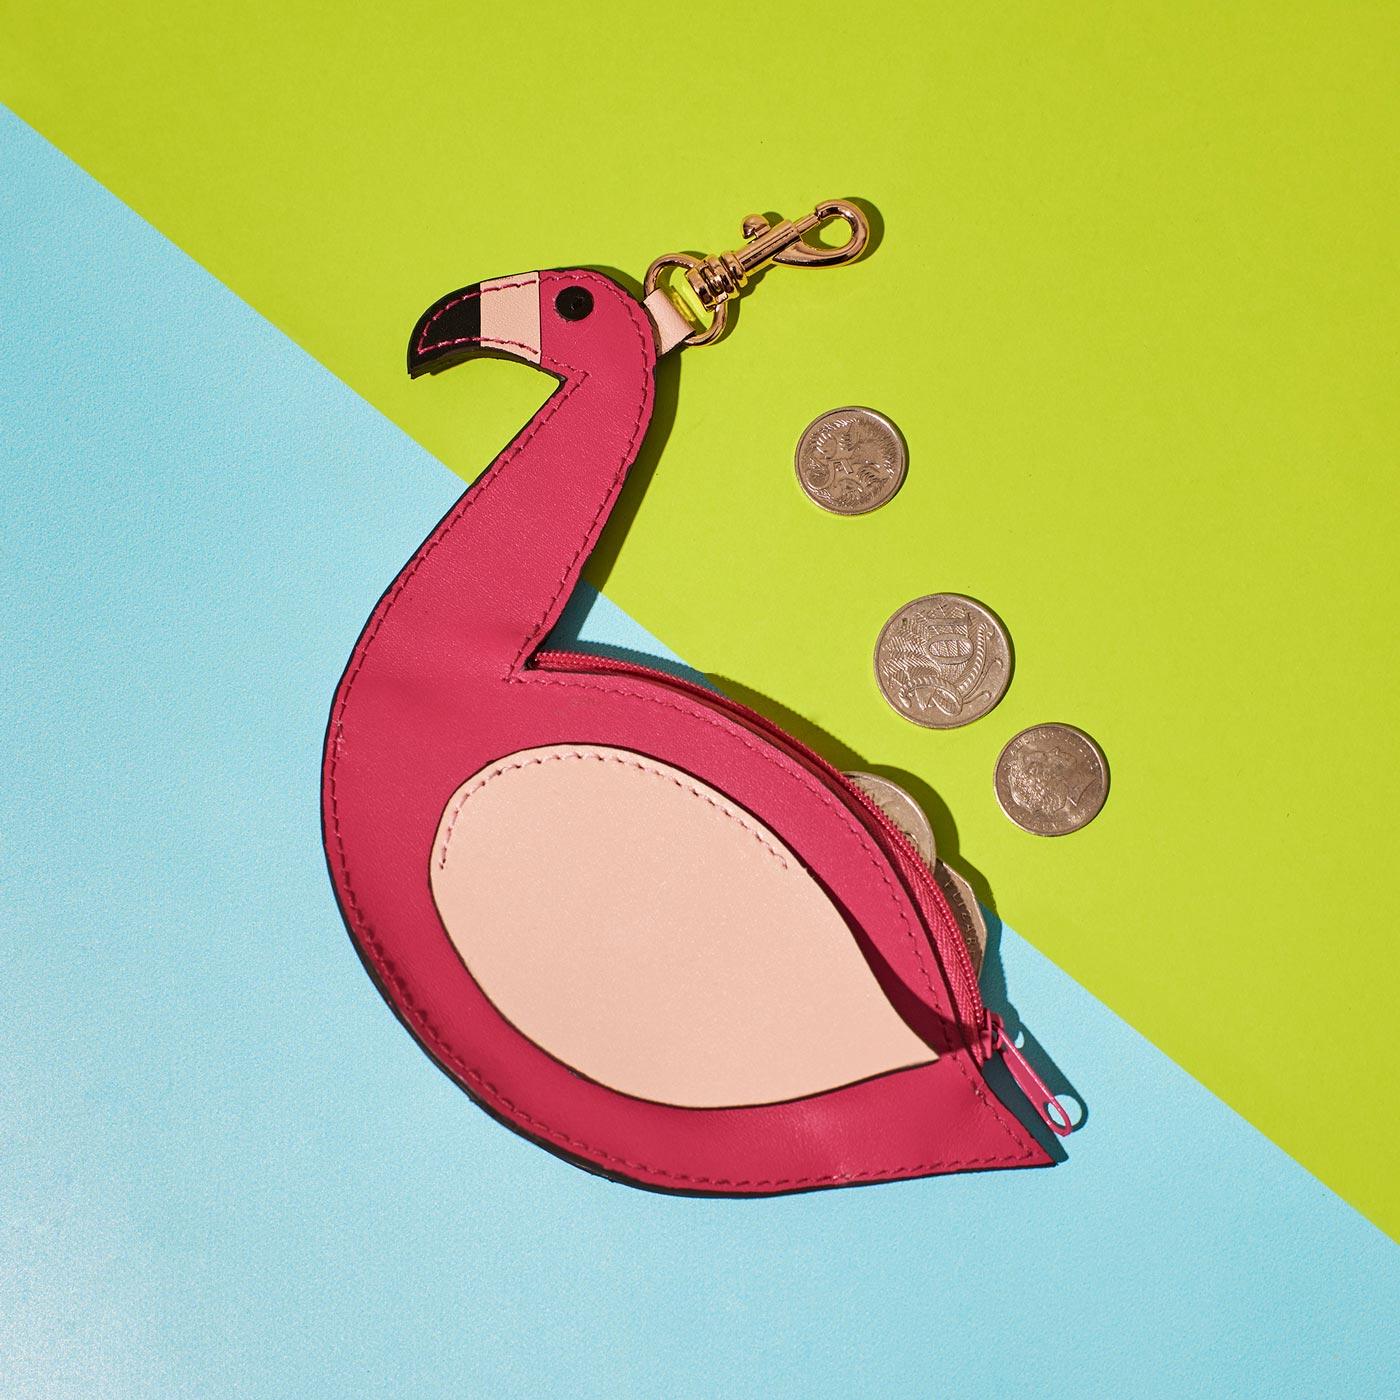 Wicker Darling's Florence the flamingo coin purse on a colourful background